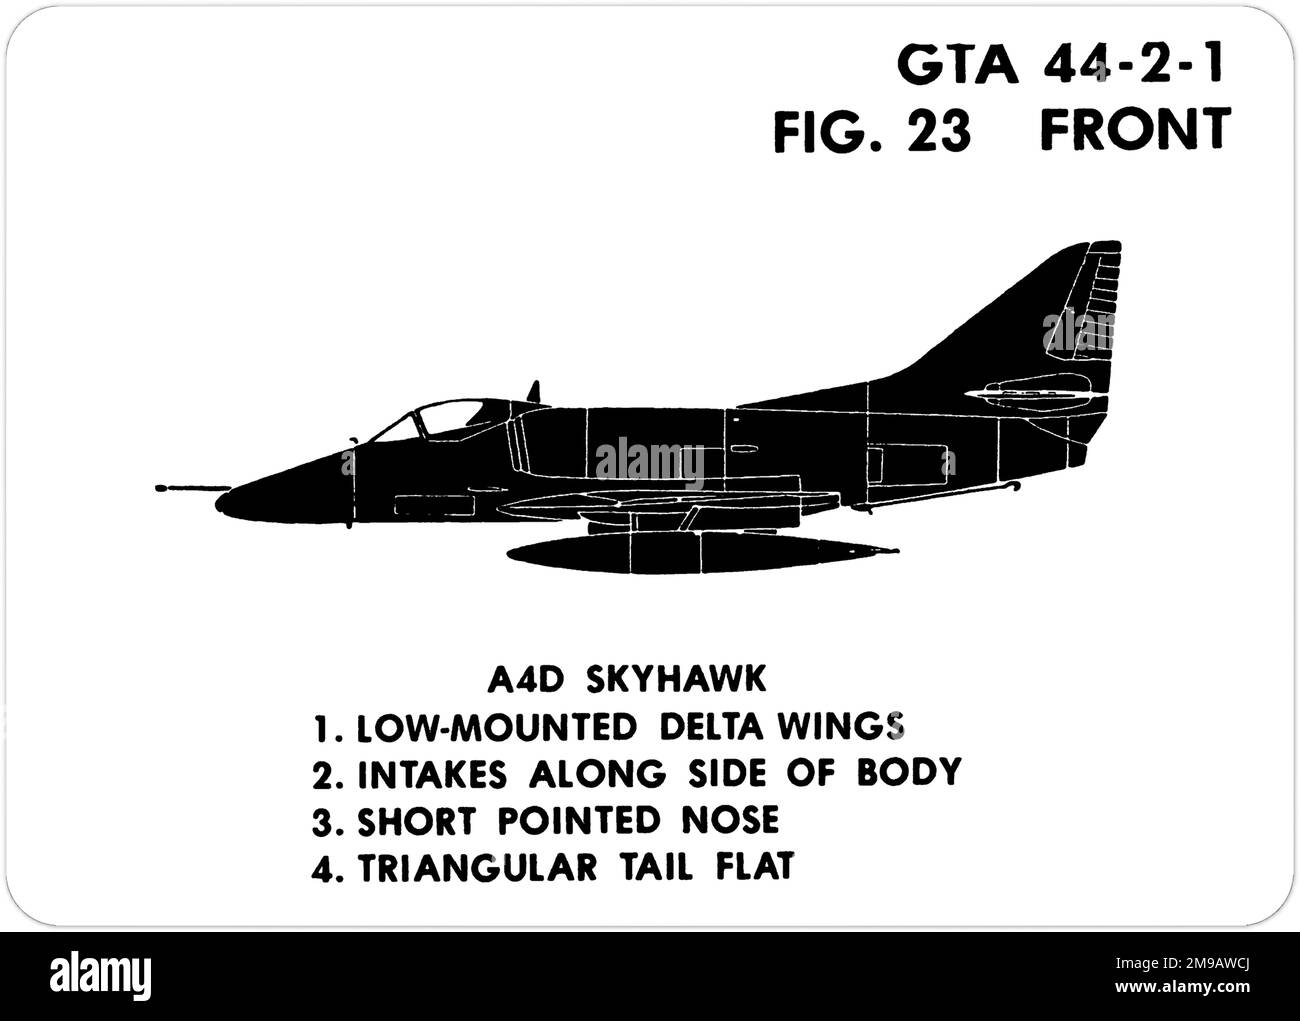 Douglas A-4E Skyhawk. This is one of the series of Graphics Training Aids (GTA) used by the United States Army to train their personnel to recognize friendly and hostile aircraft. This particular set, GTA 44-2-1, was issued in July1977. The set features aircraft from: Canada, Italy, United Kingdom, United States, and the USSR. Stock Photo